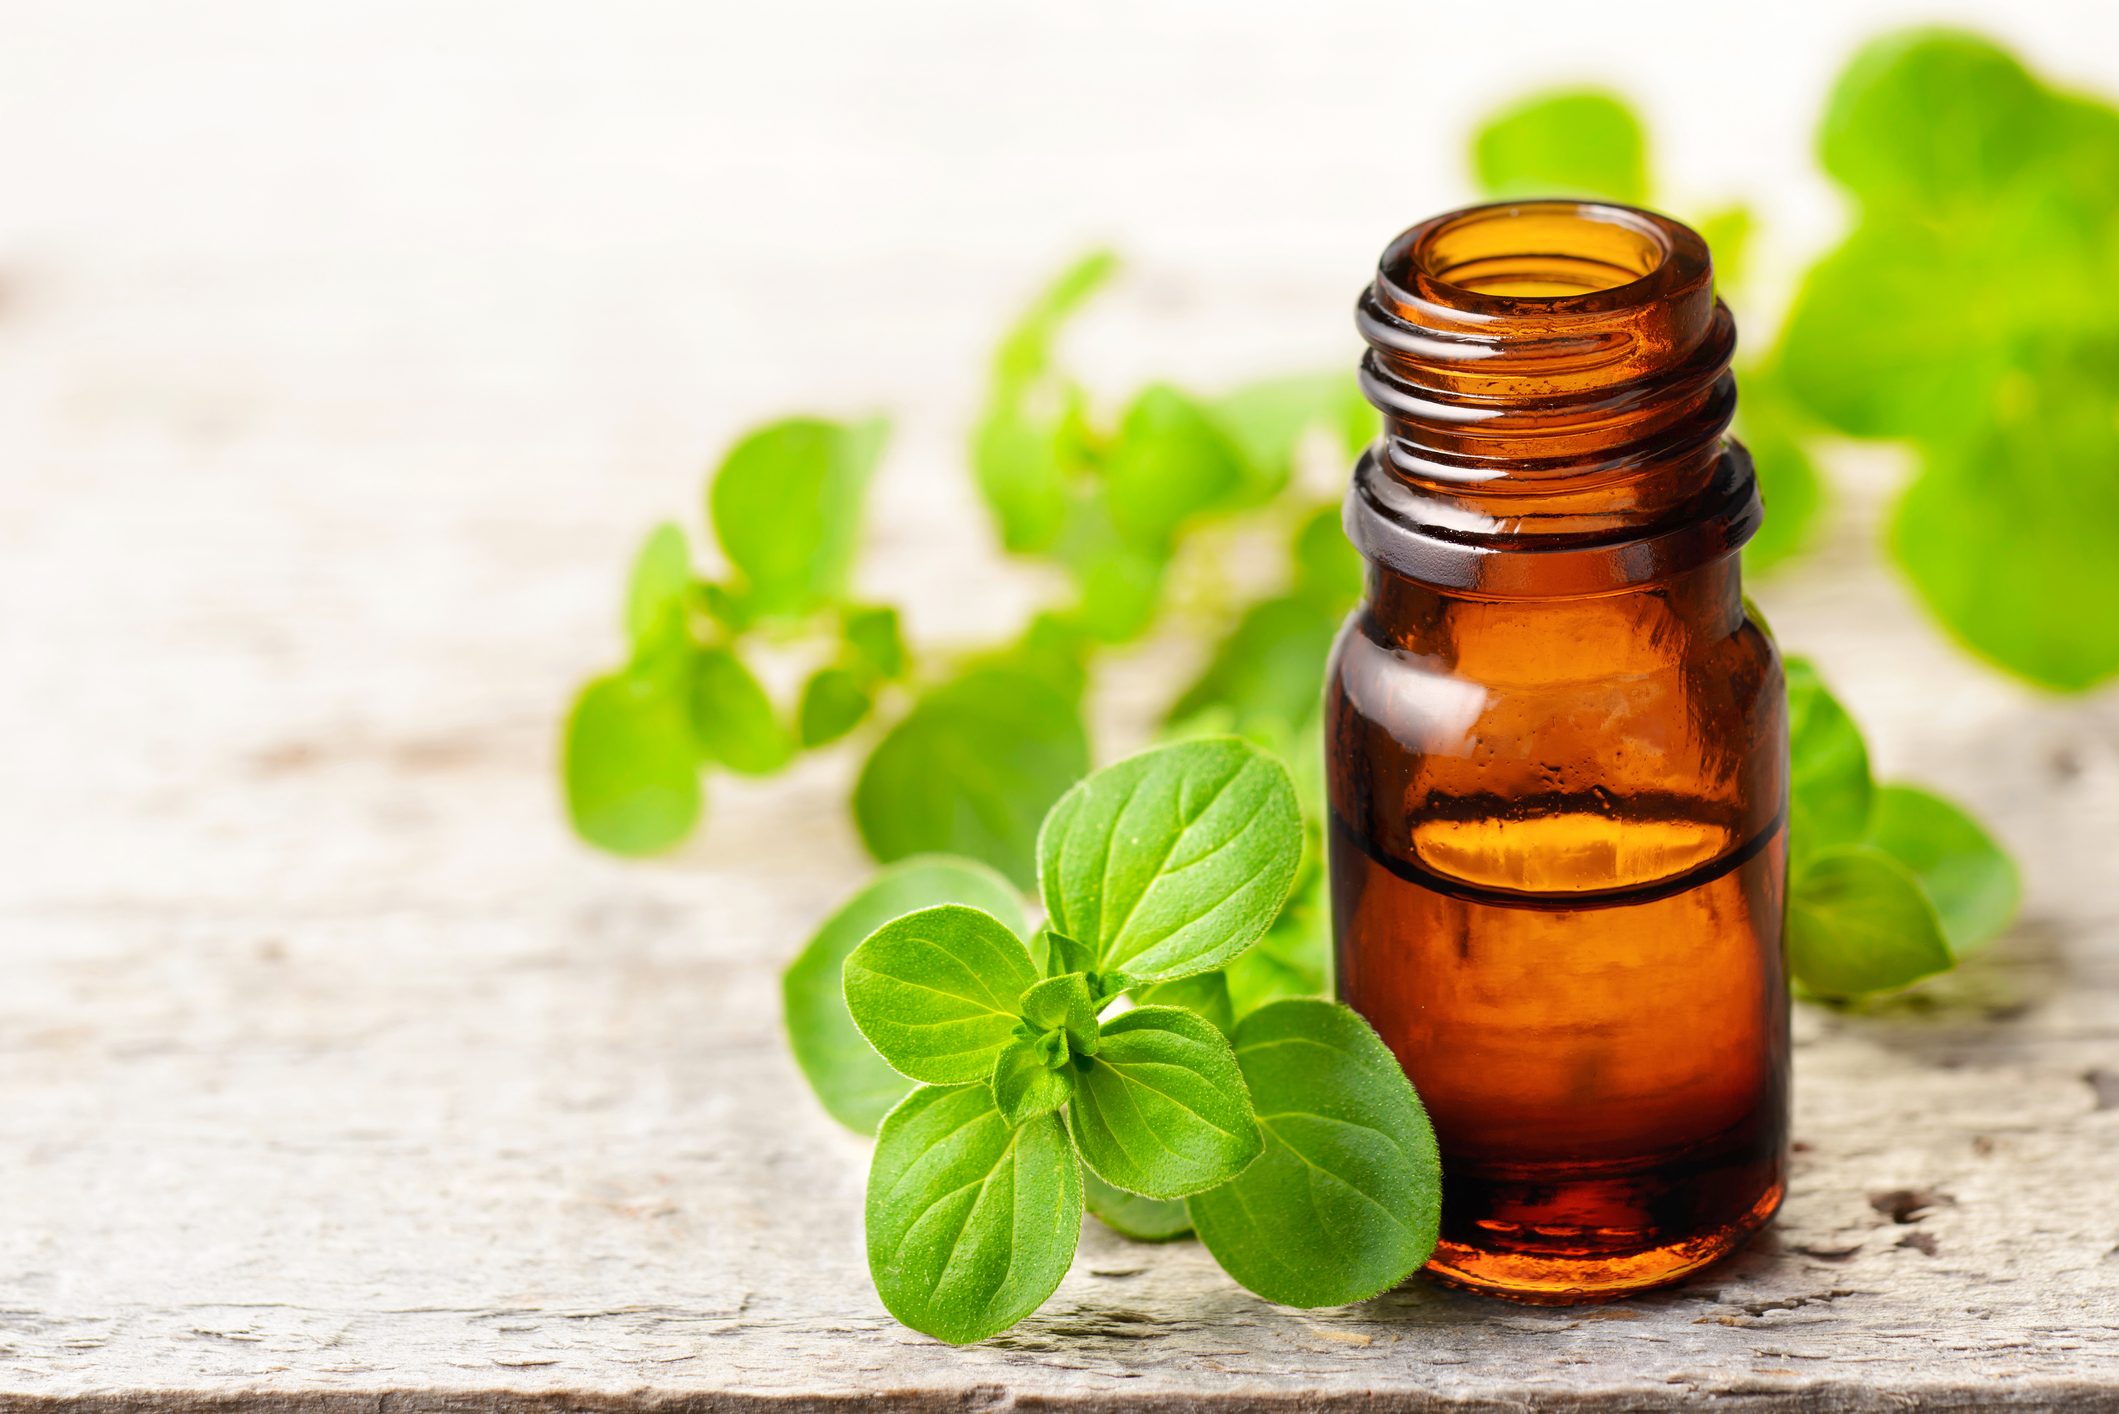 Why Oregano Oil Is All the Rage?